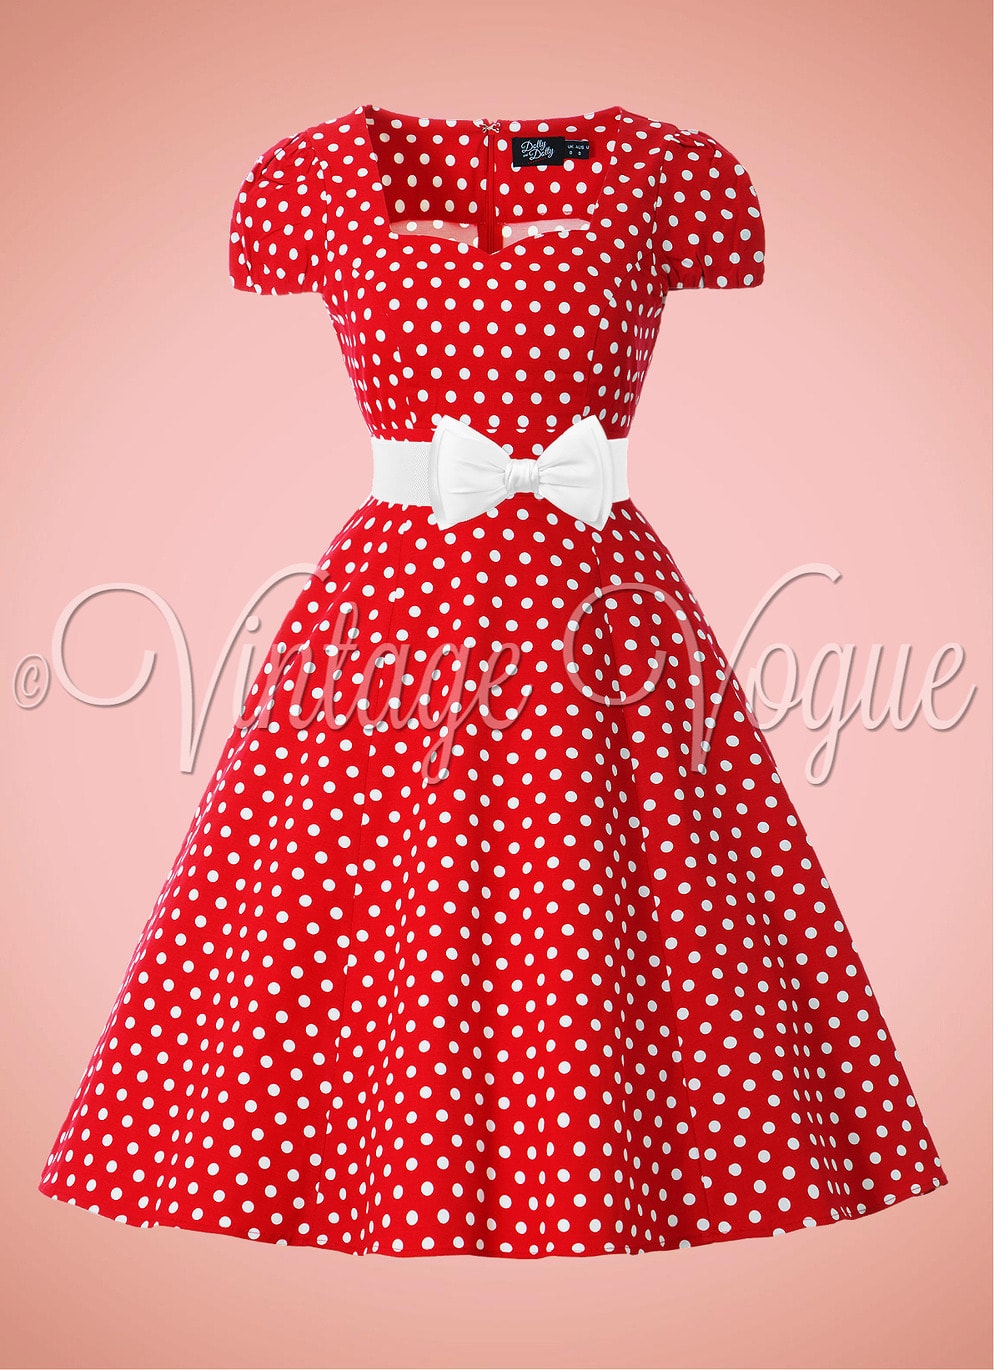 Dolly and Dotty 50's Retro Rockabilly Swing Kleid Claudia Polka Dot Dress in Rot punkte gepunktet 1695ah